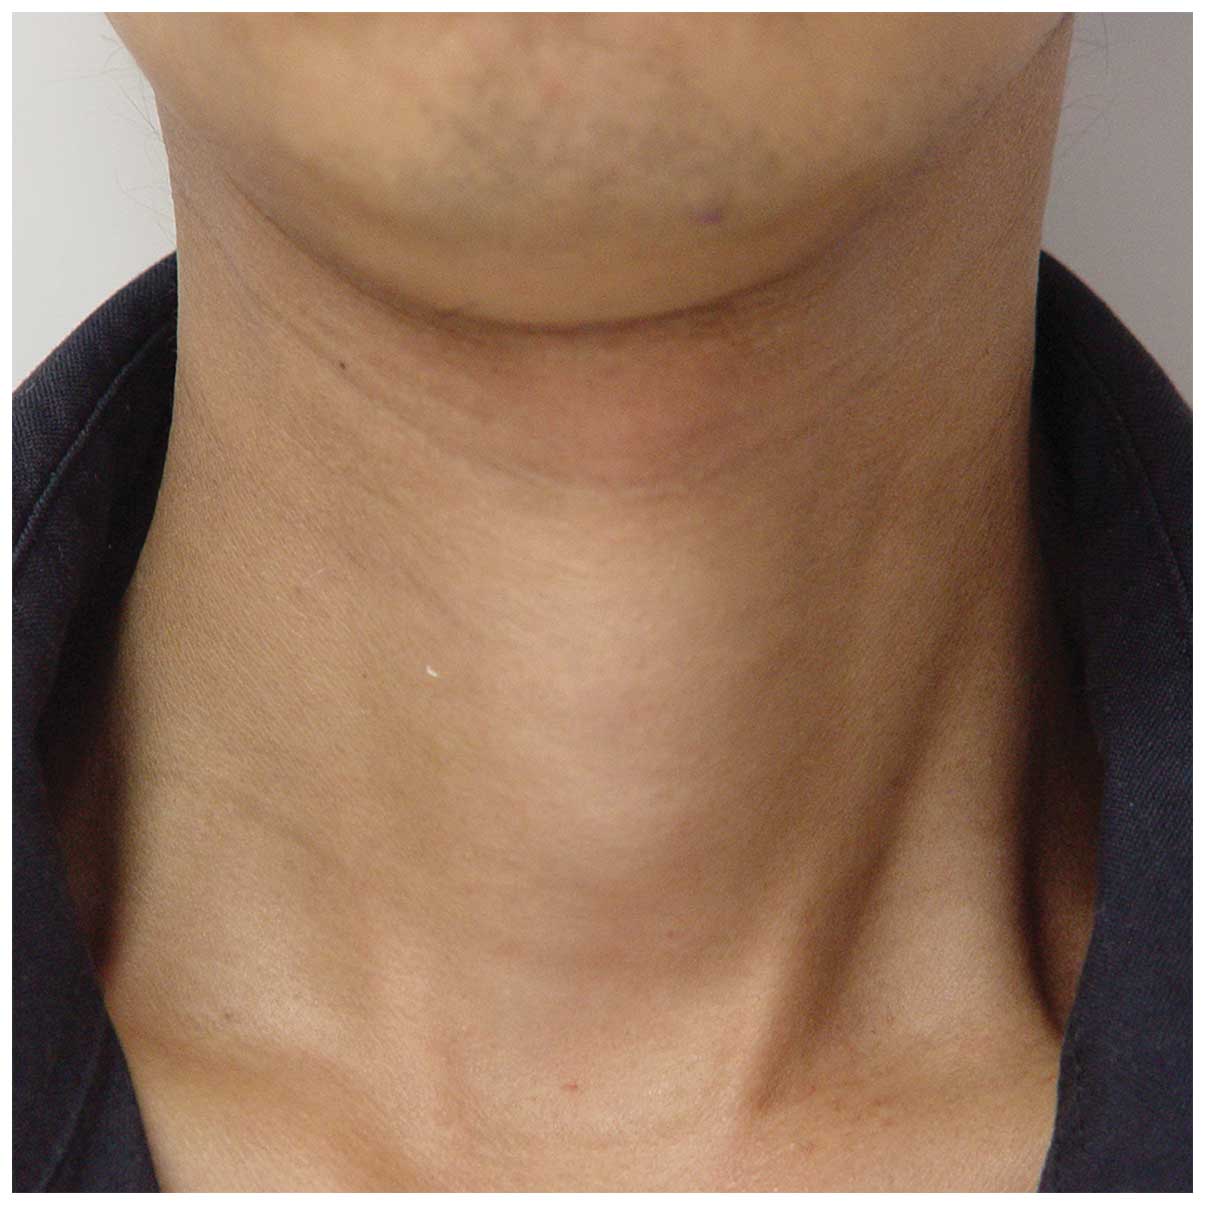 Human Gland In Neck